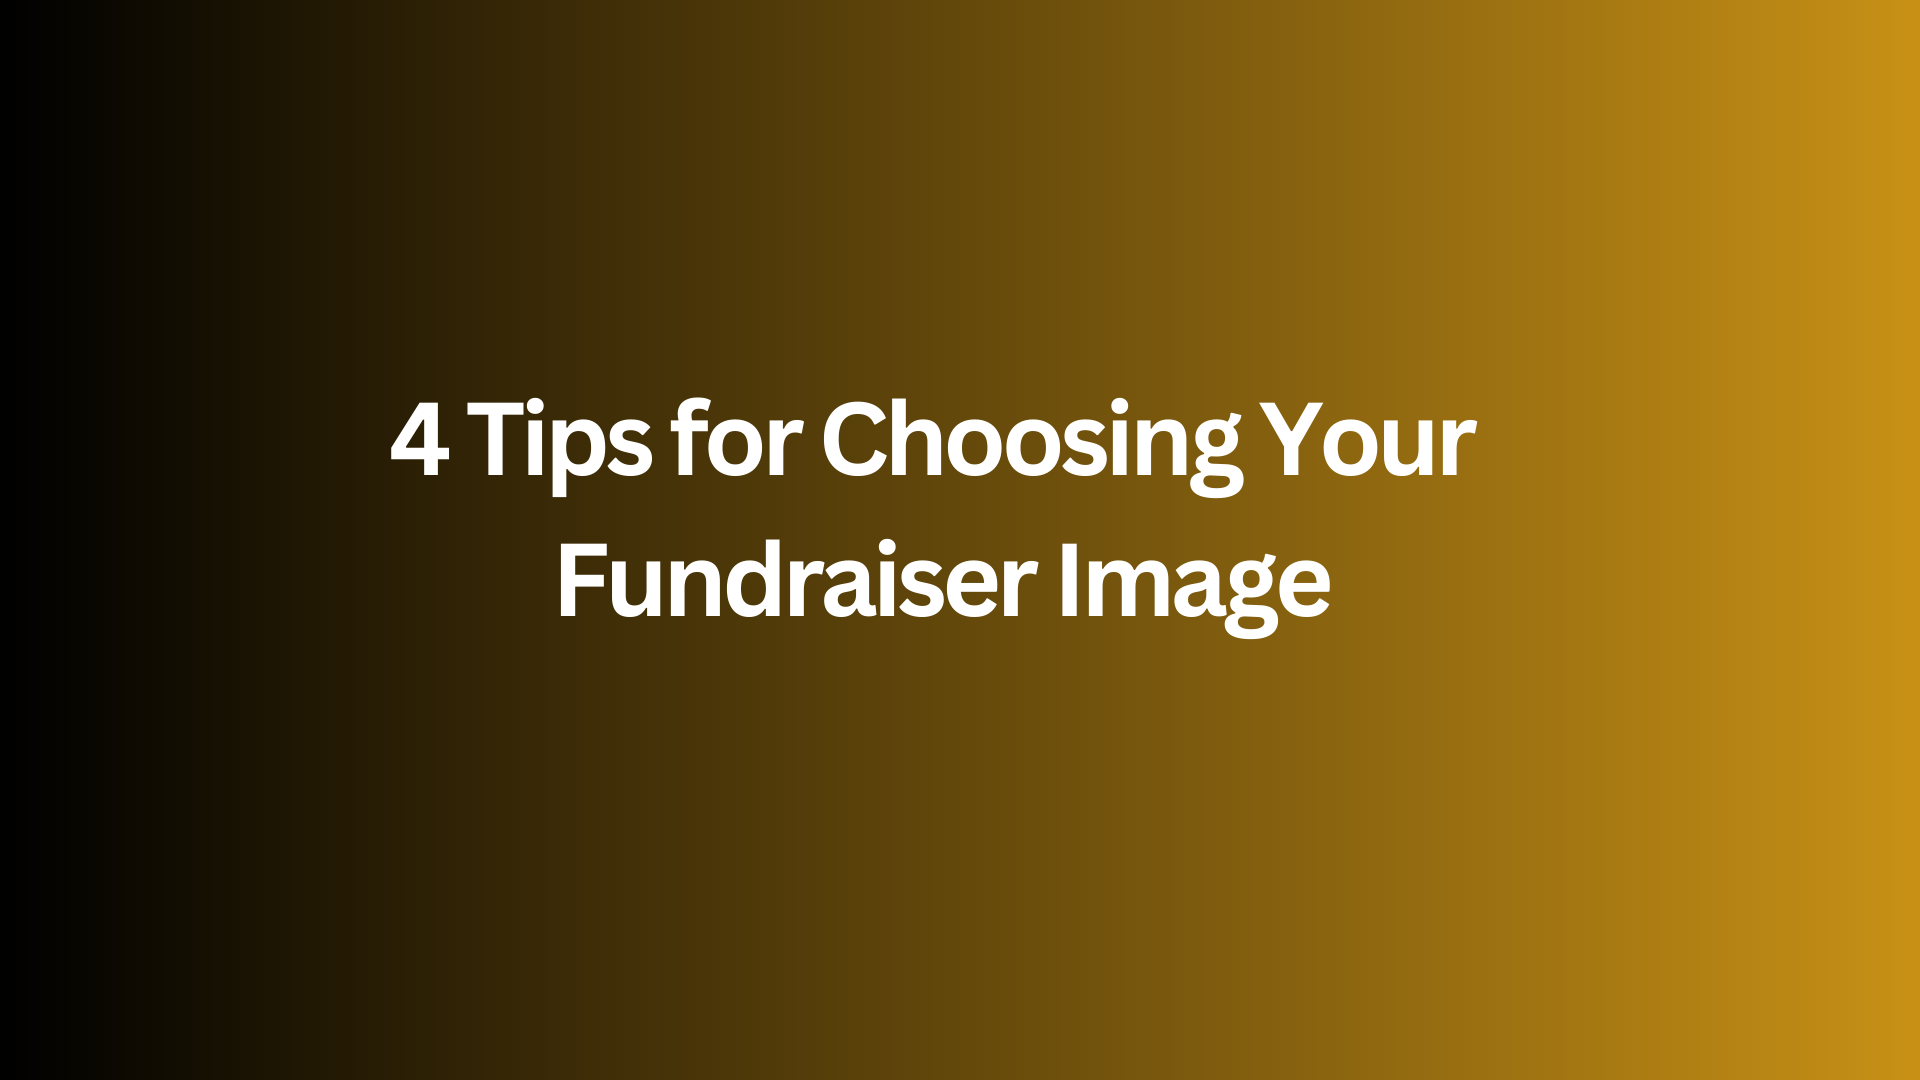 4 Tips for Choosing Your Fundraiser Image